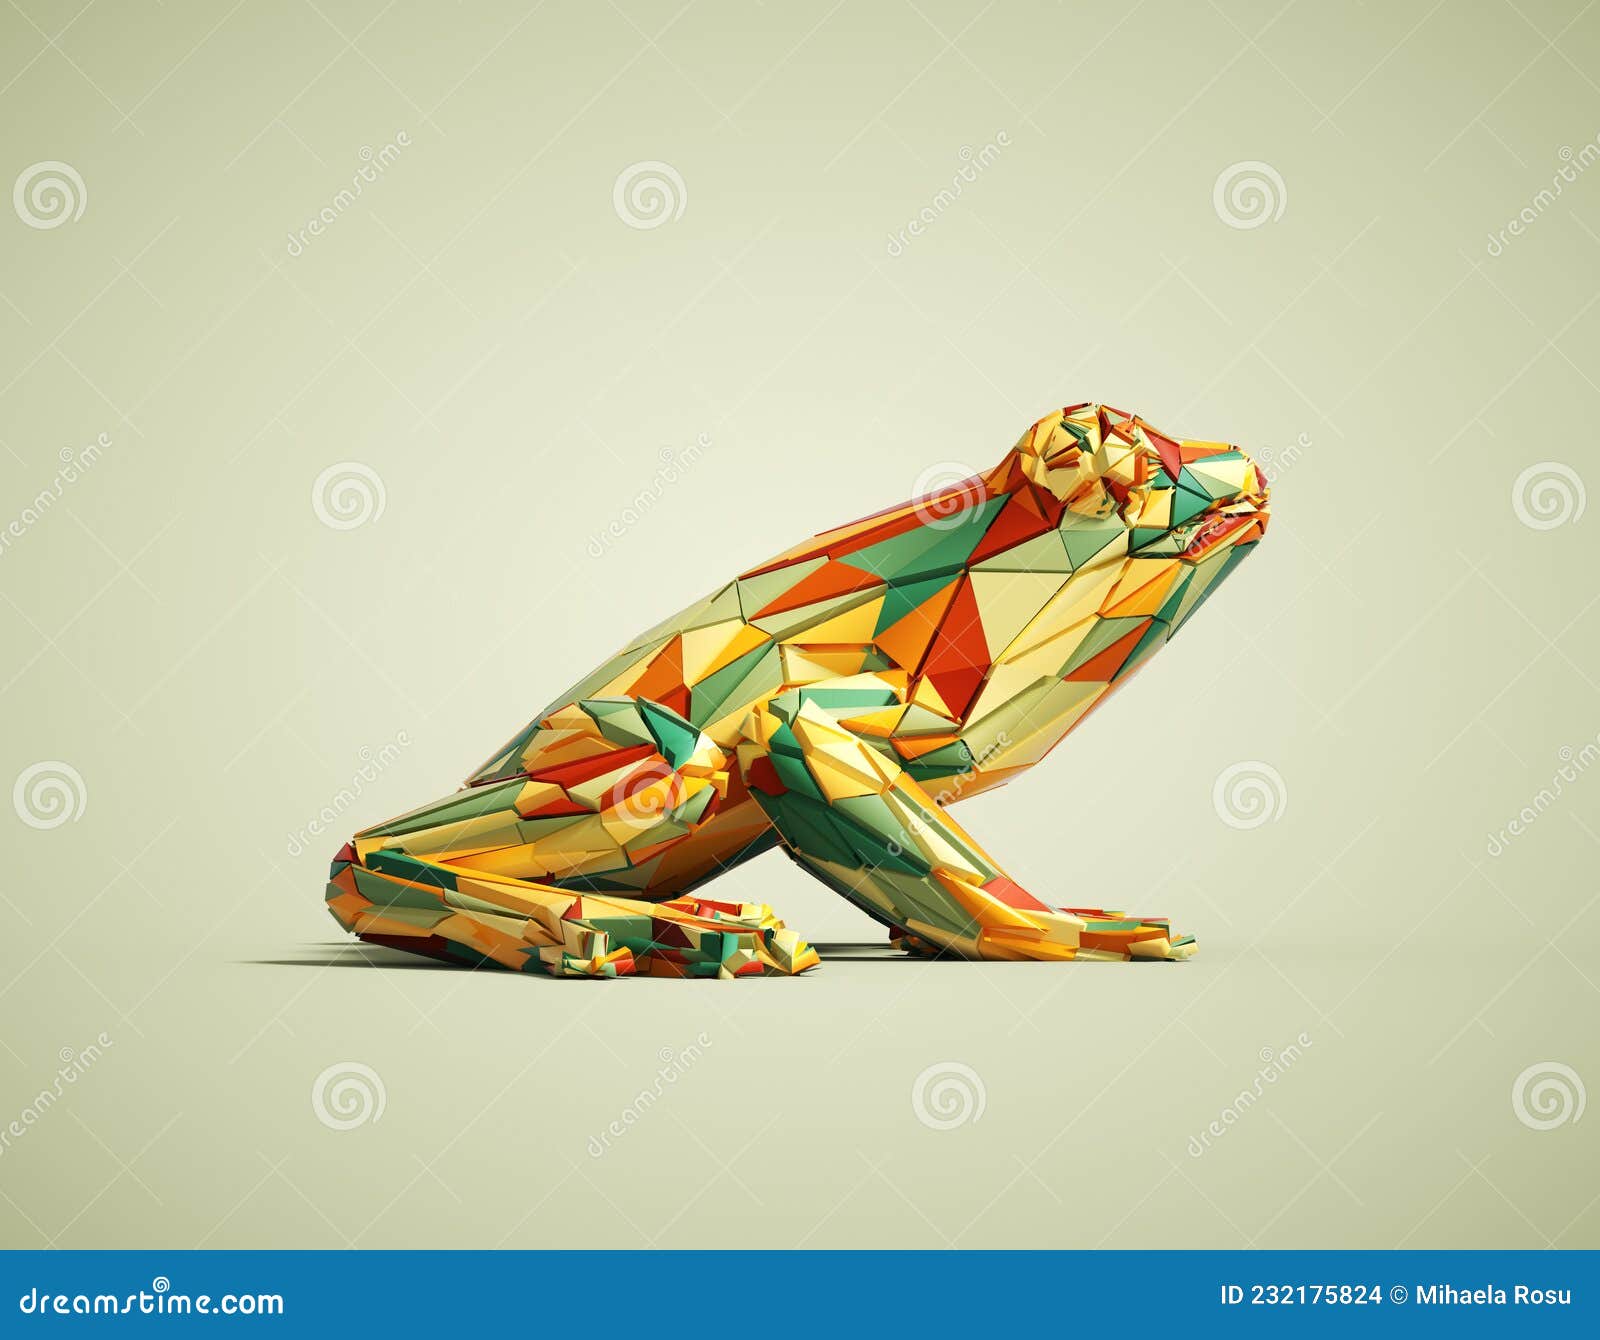 Frog low poly stock illustrations â frog low poly stock illustrations vectors clipart